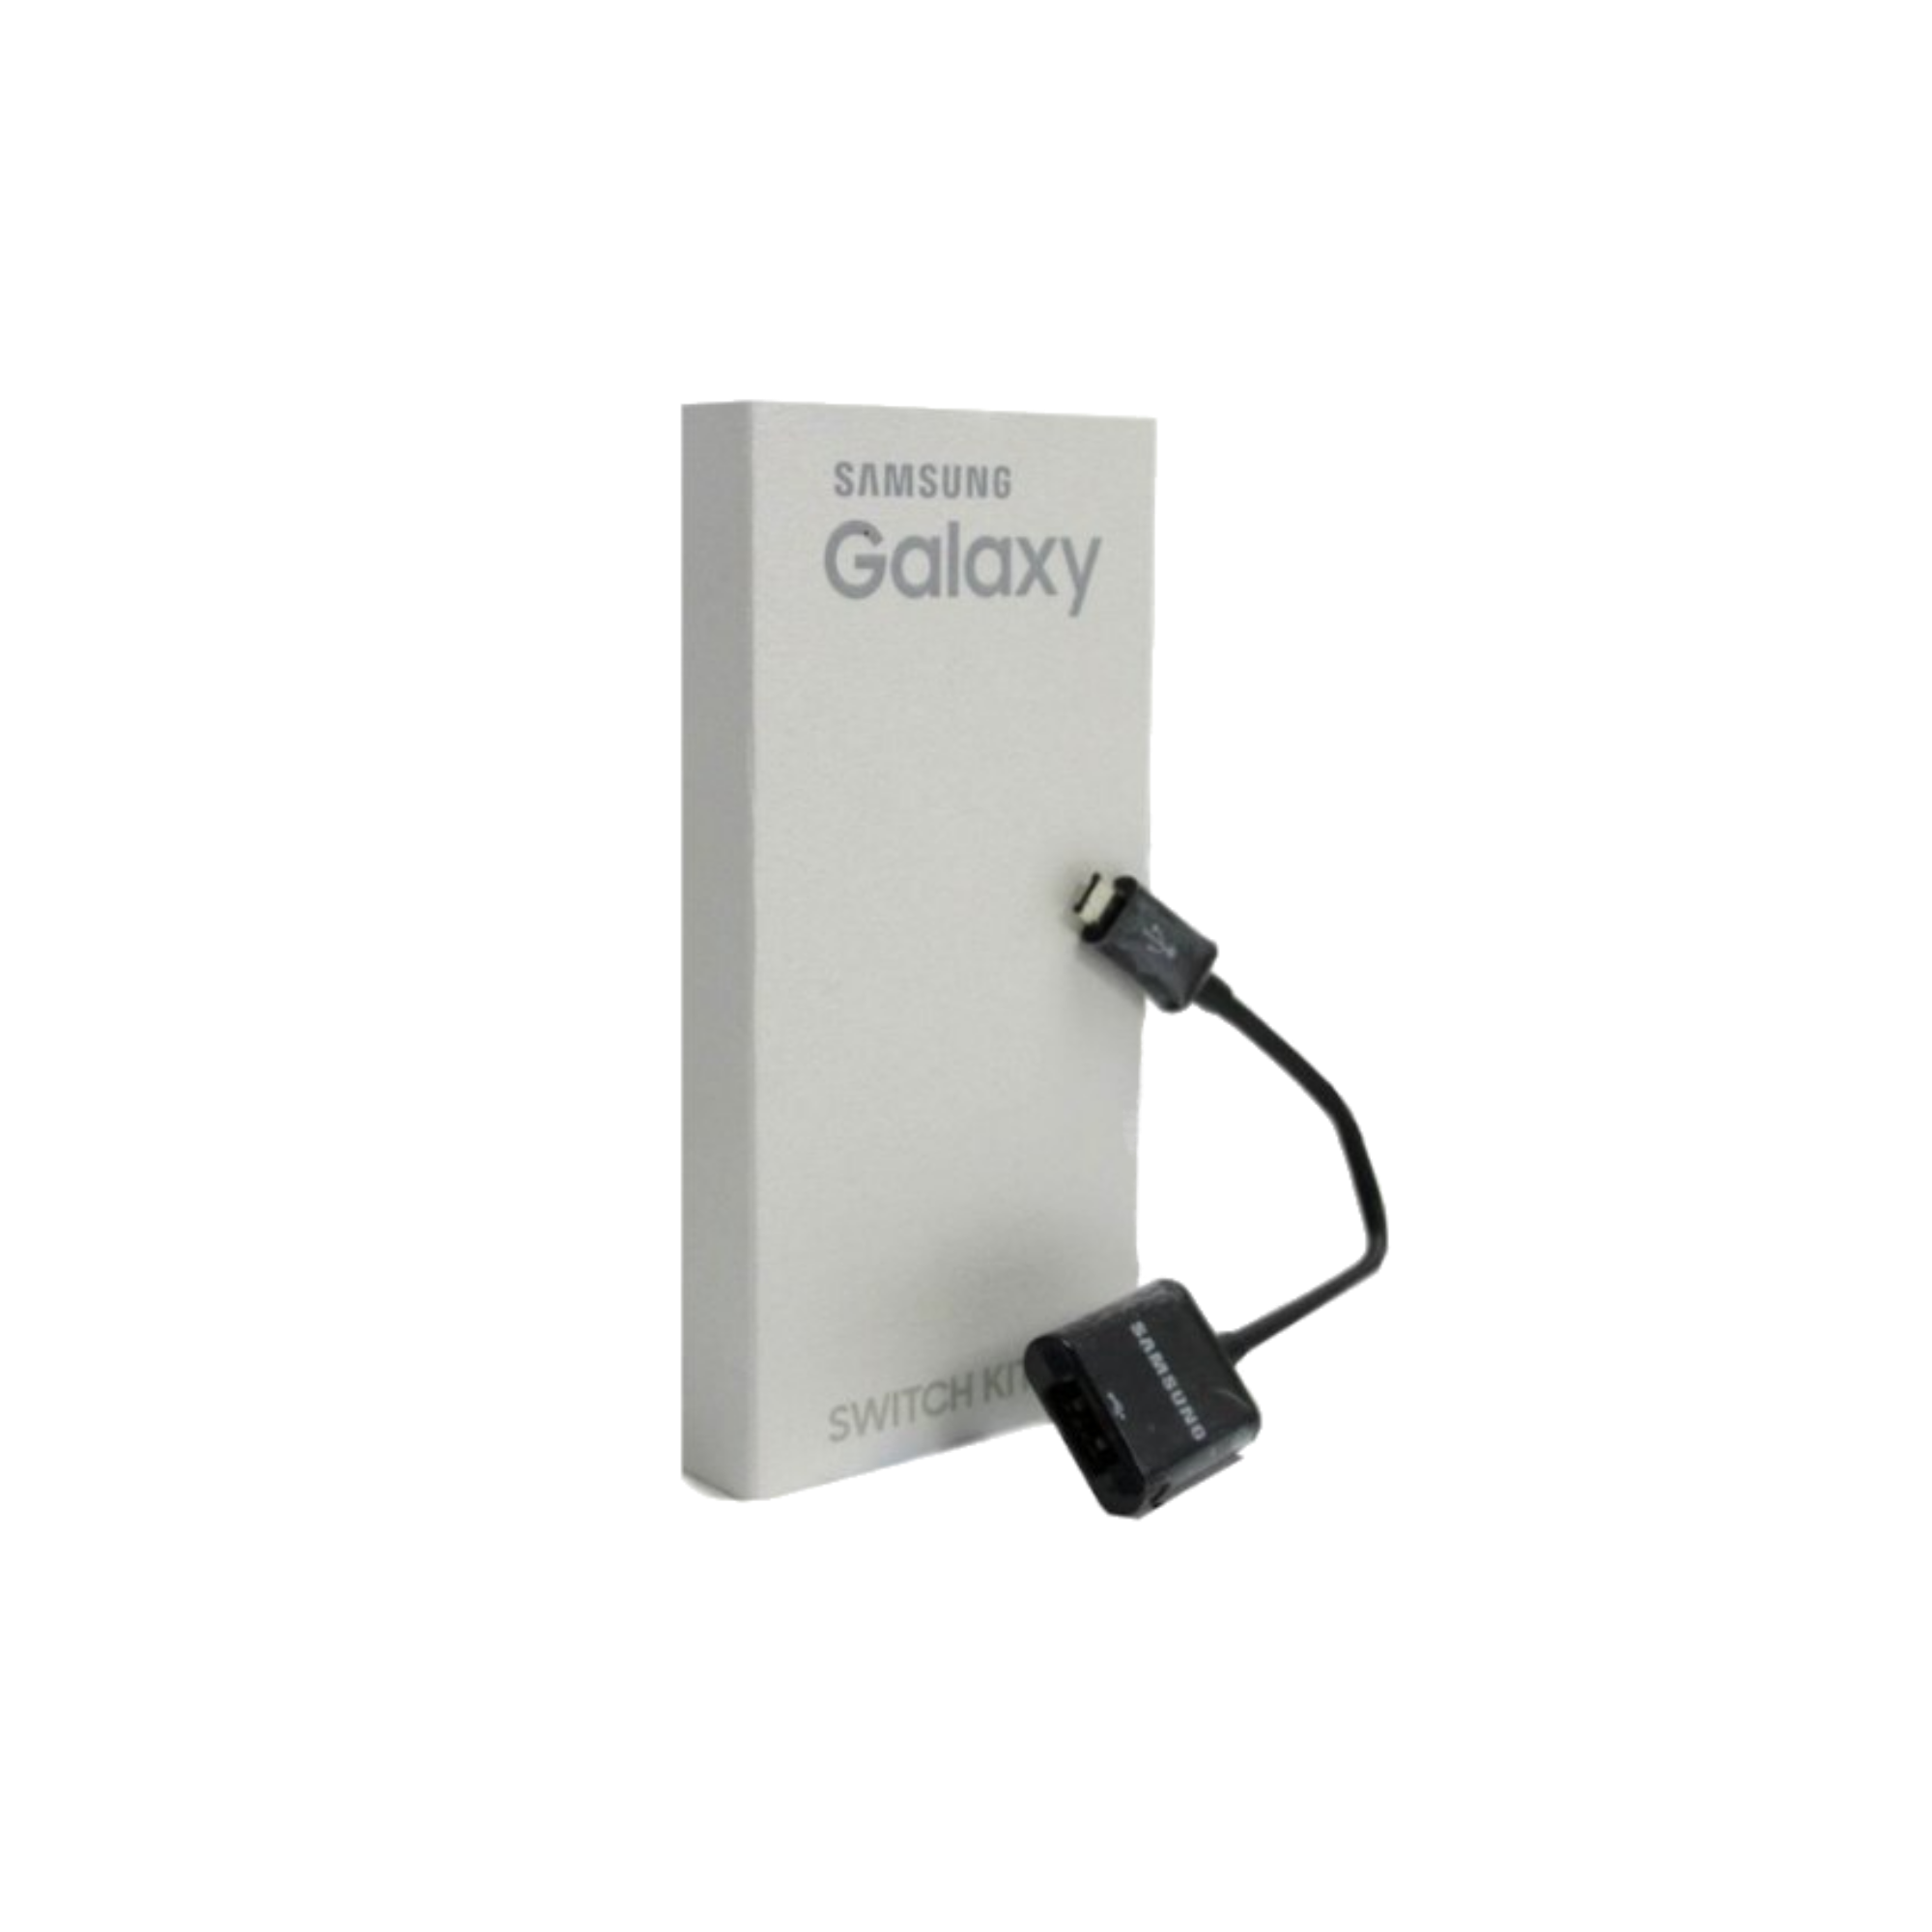 Samsung ET-R205 adapter box Wholesale Suppliers